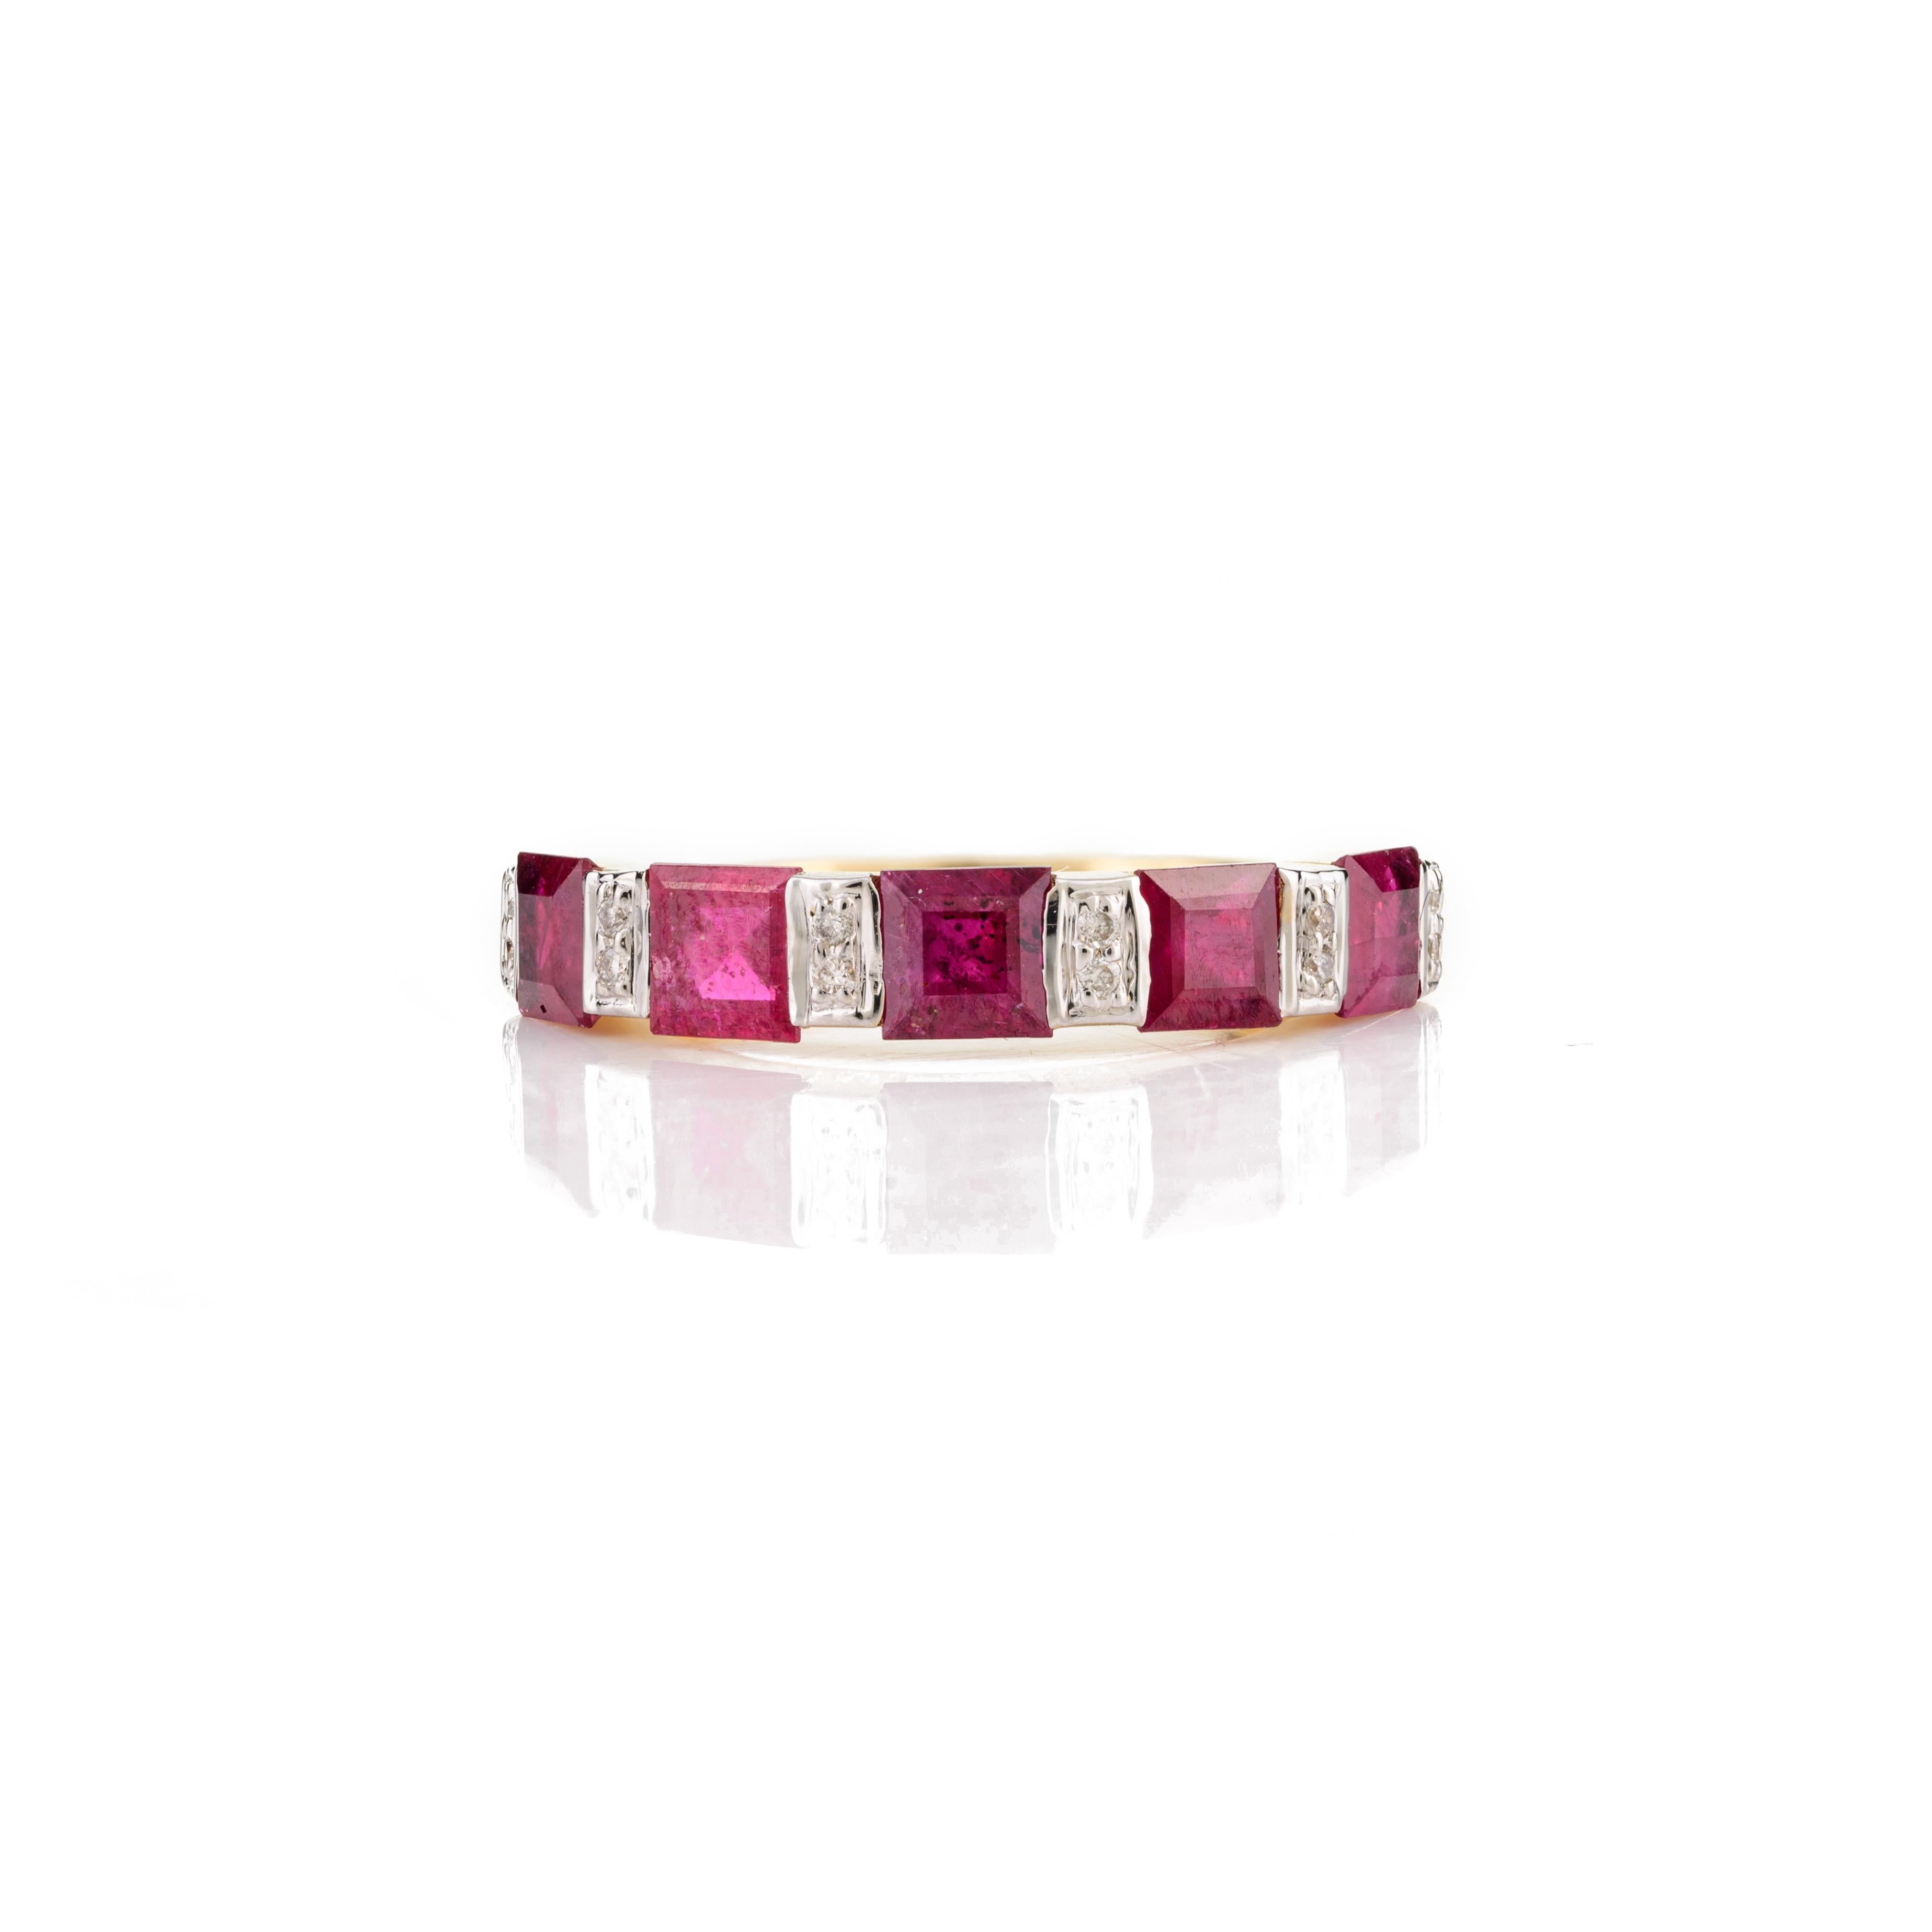 For Sale:  2.15ct Deep Red Ruby and Diamond Engagement Band Ring in 18k Solid Yellow Gold 3